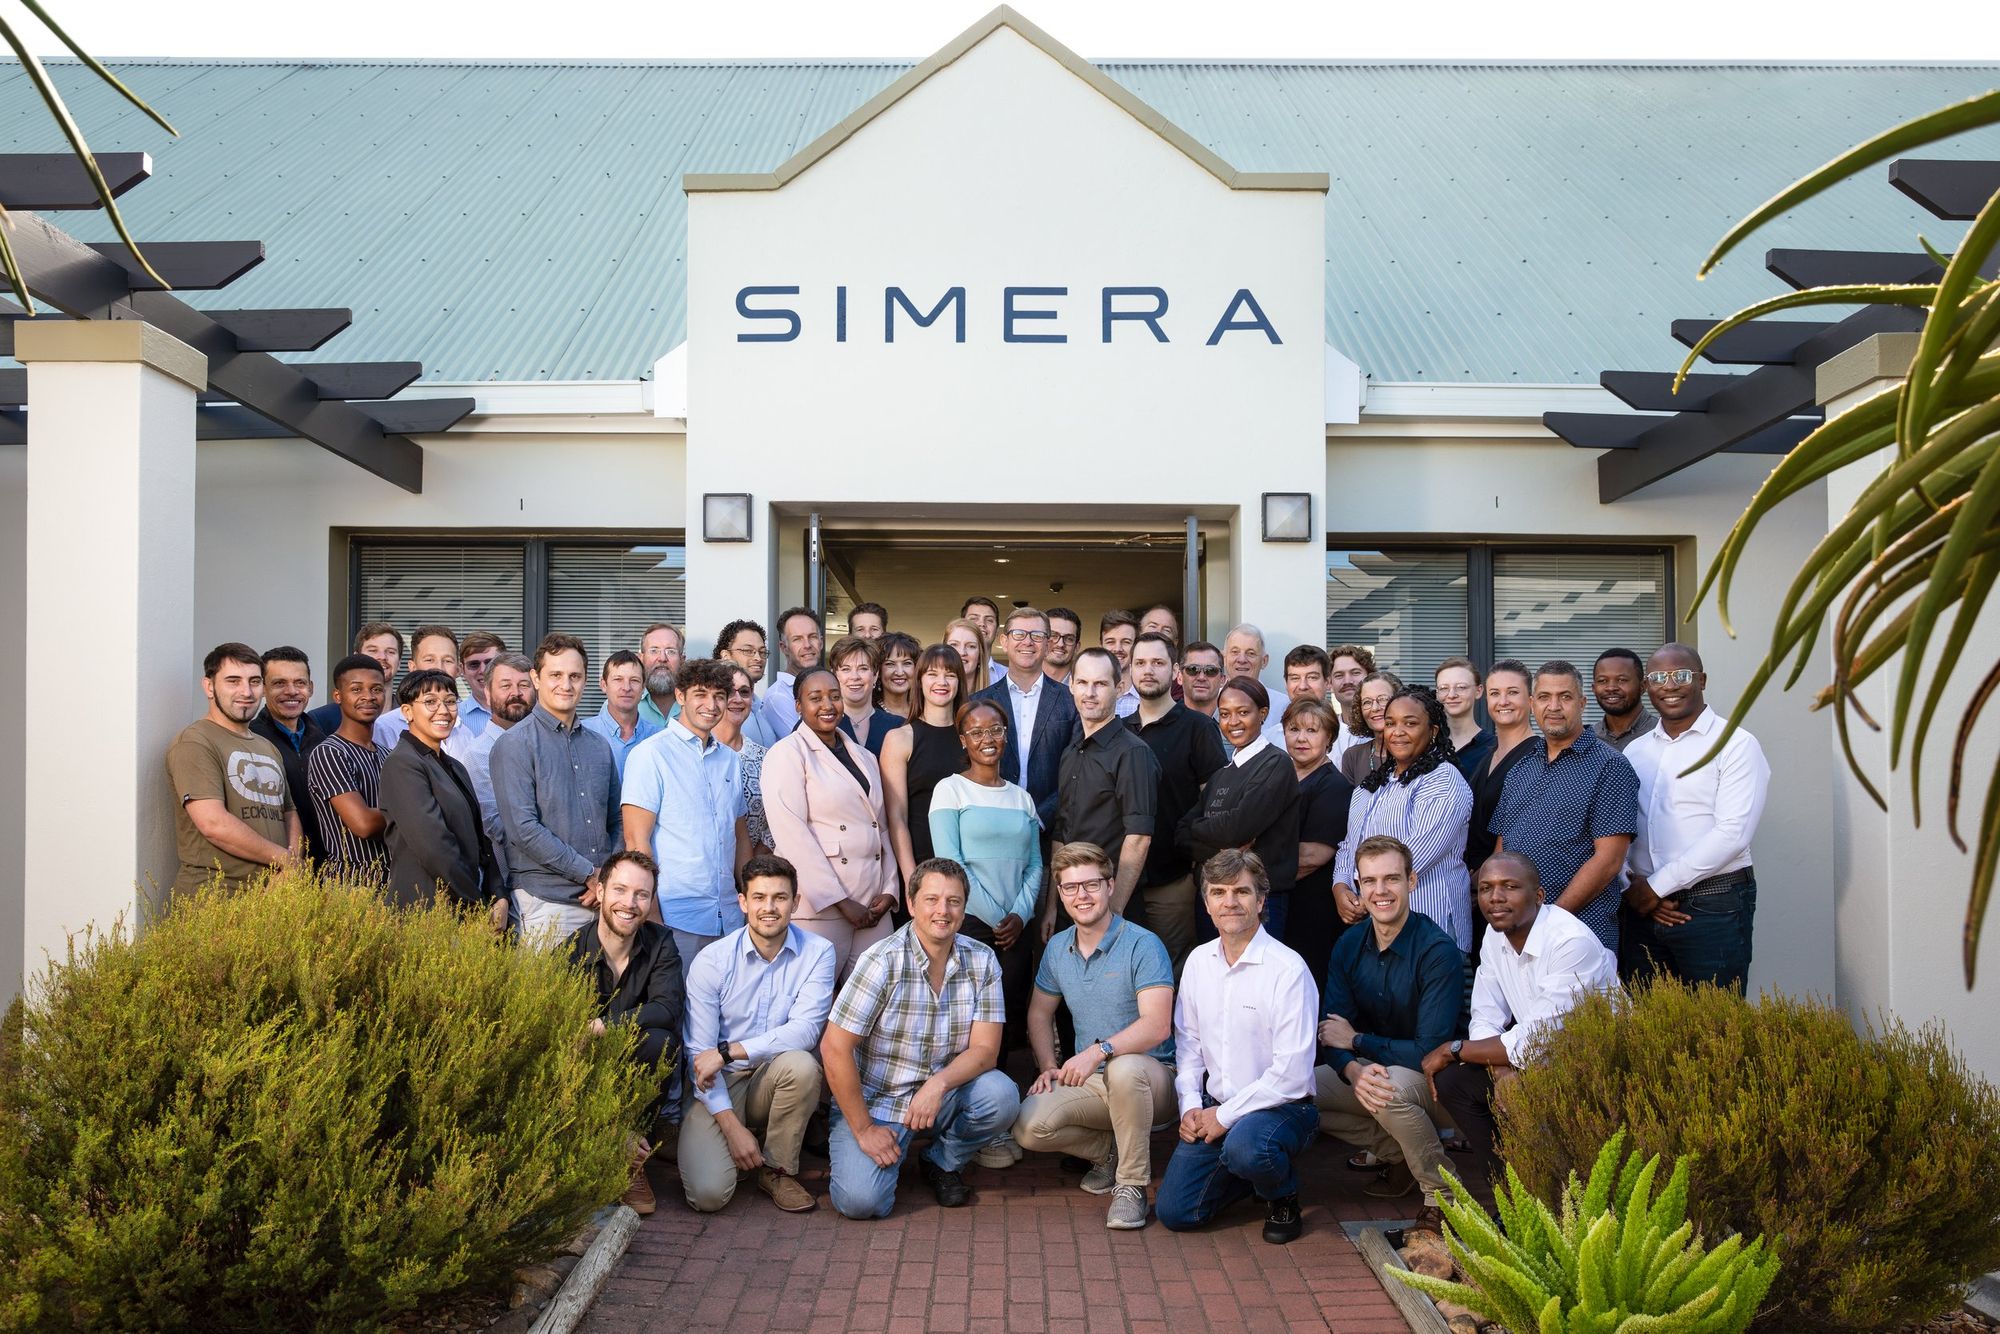 Pioneering Optical Solutions: South Africa’s Simera Sense Secures €13.5 million Funding